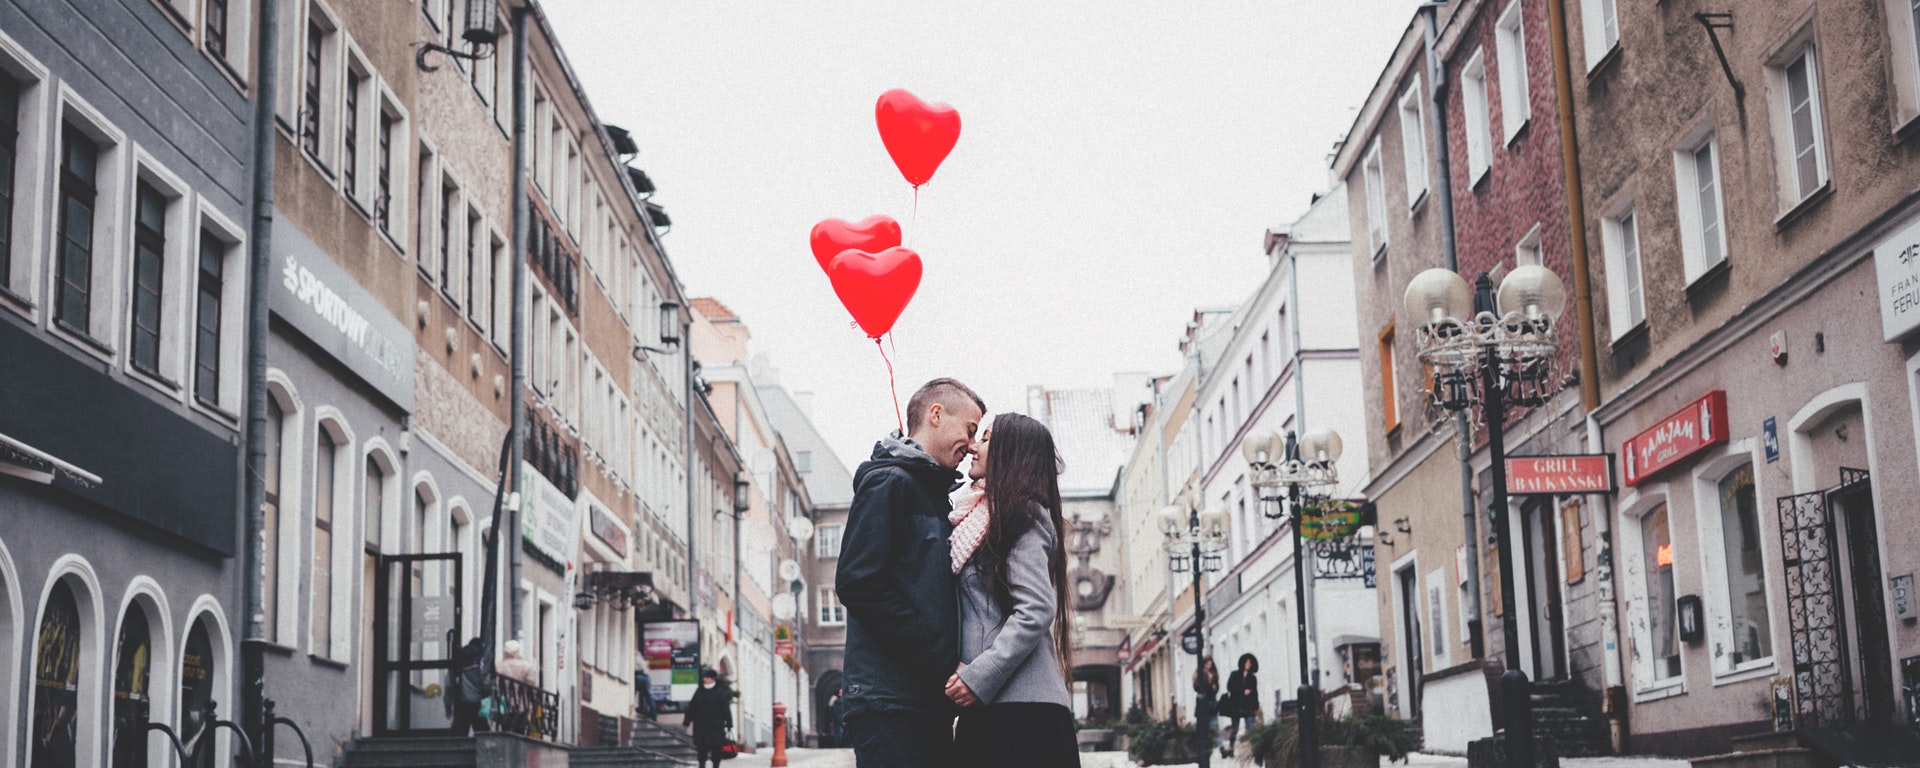 TIPS TO FIND A DATE FOR VALENTINE’S DAY